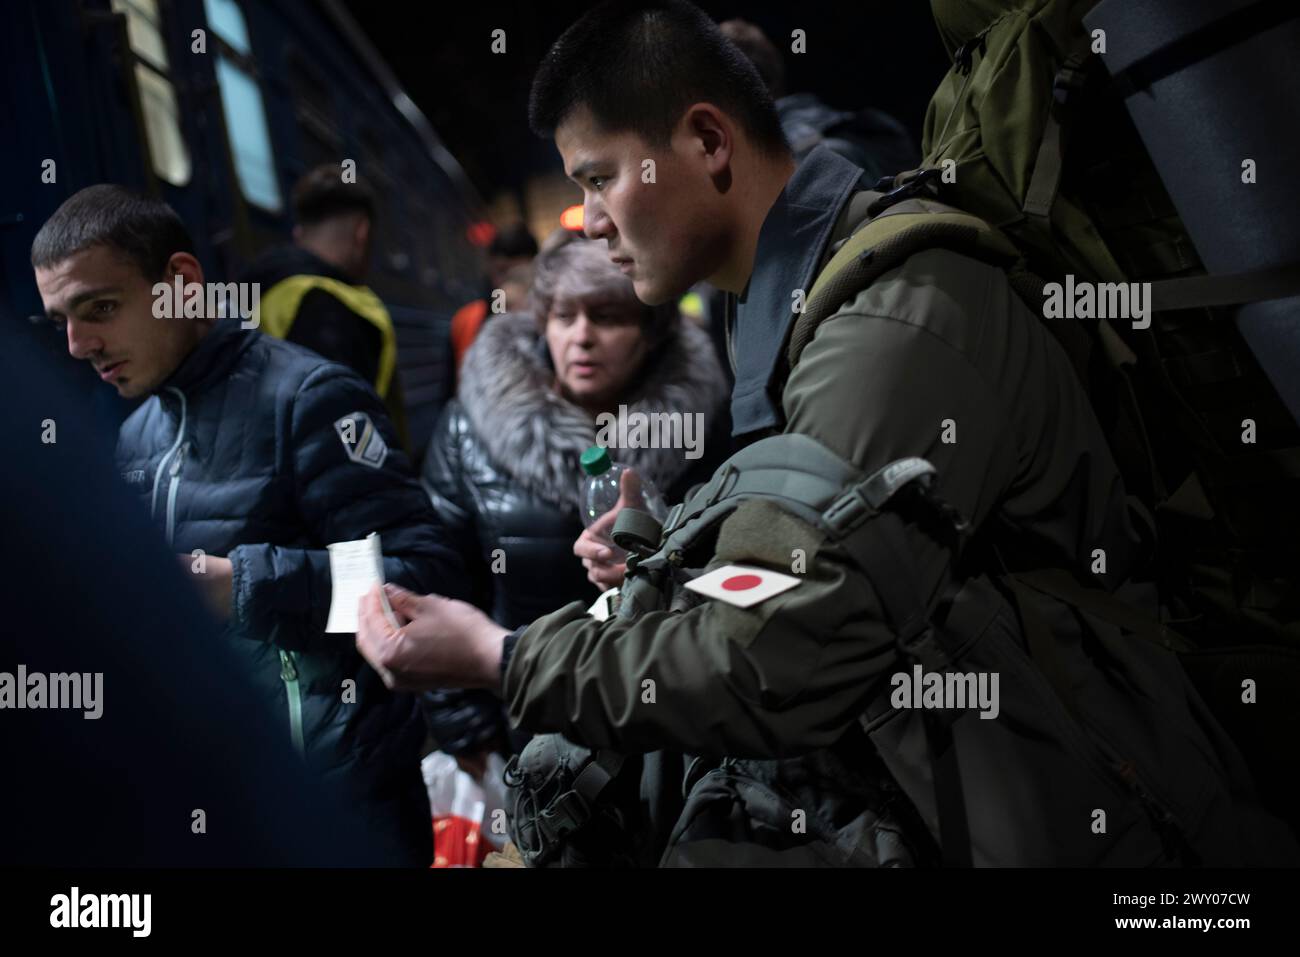 A Japanese soldier, who wants to join the Ukrainian army, shows his ticket for the train that will get him close to his army camp. Stock Photo